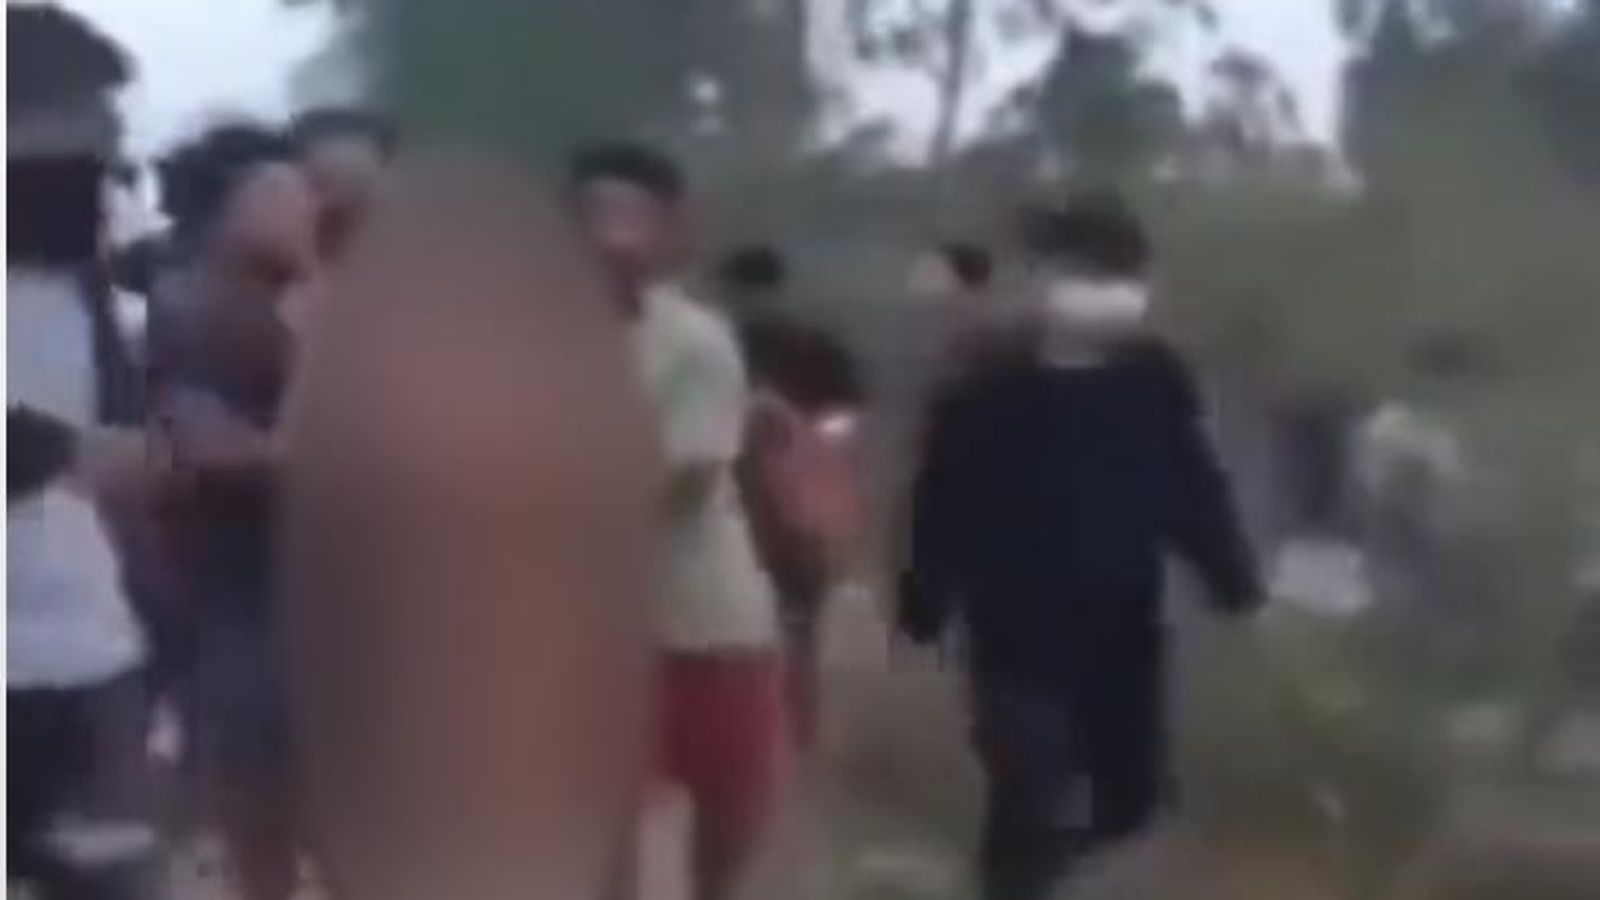 Indian Girl Raped Sex Jungle Mms - Gang rape investigated as video shows abducted Indian women being paraded  naked in Manipur | World News | Sky News